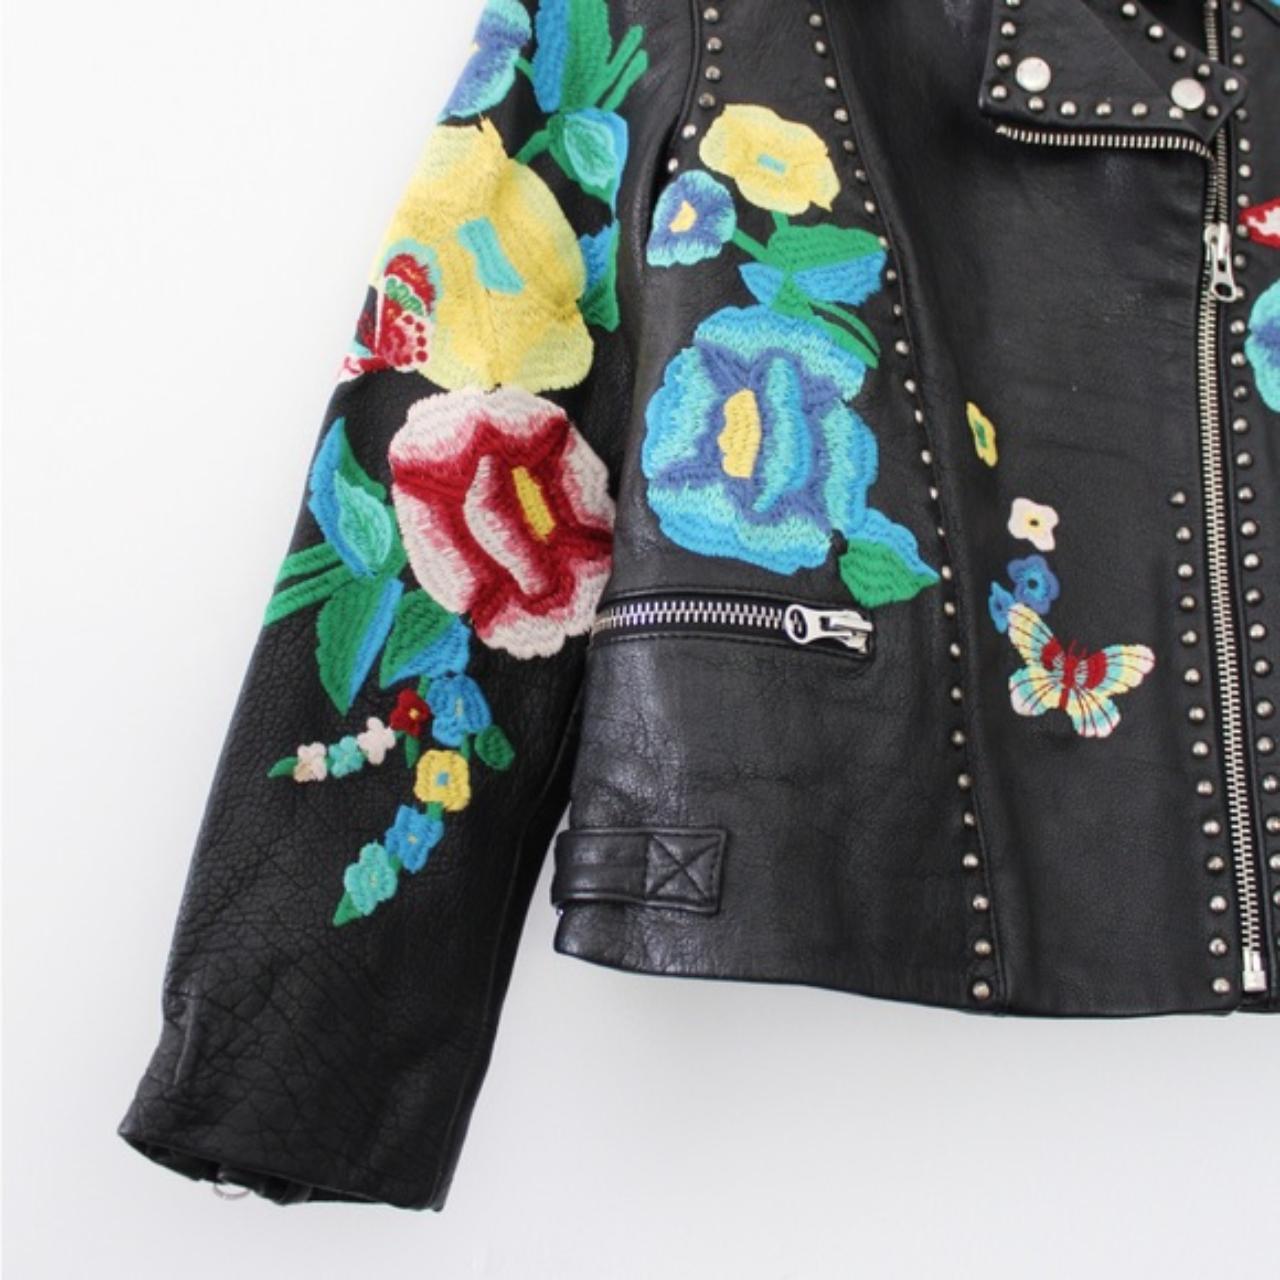 ASOS Premium Leather Biker Jacket With Floral Embroidery Black Size 6 $316